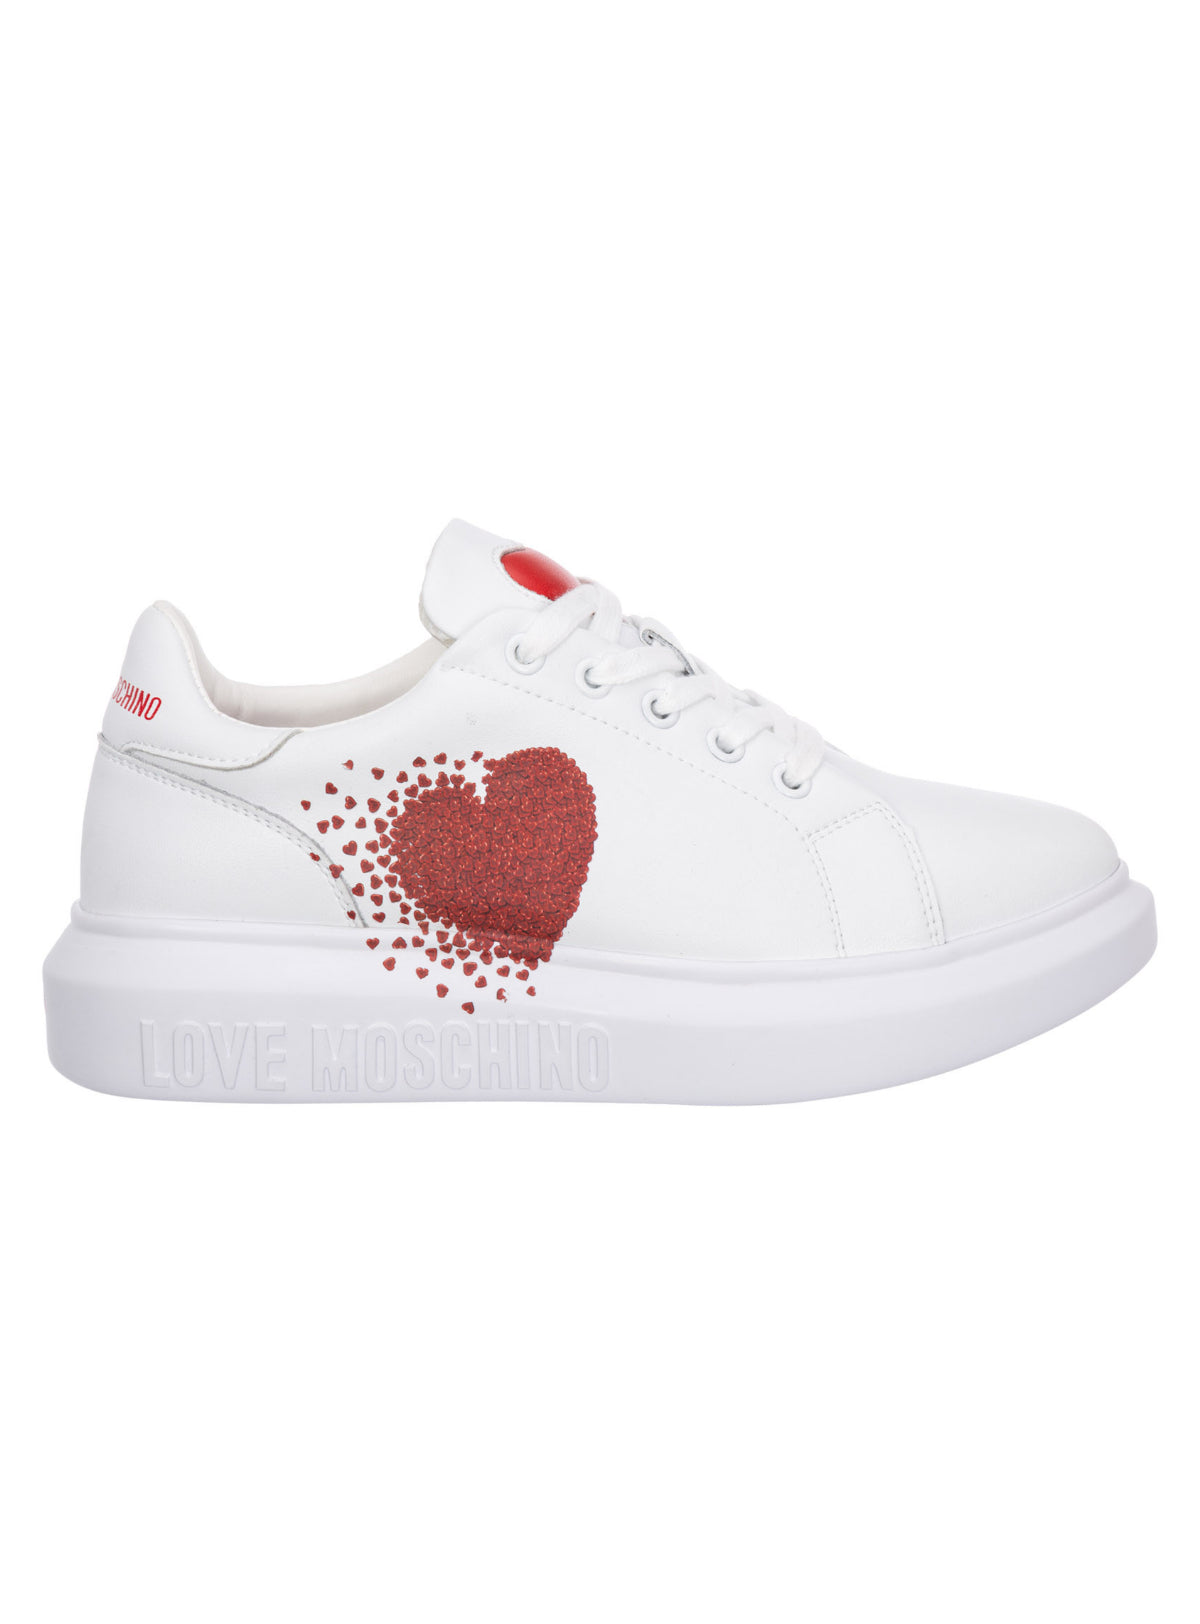 Moschino Shoes - Women's Sneakers With Heart - White